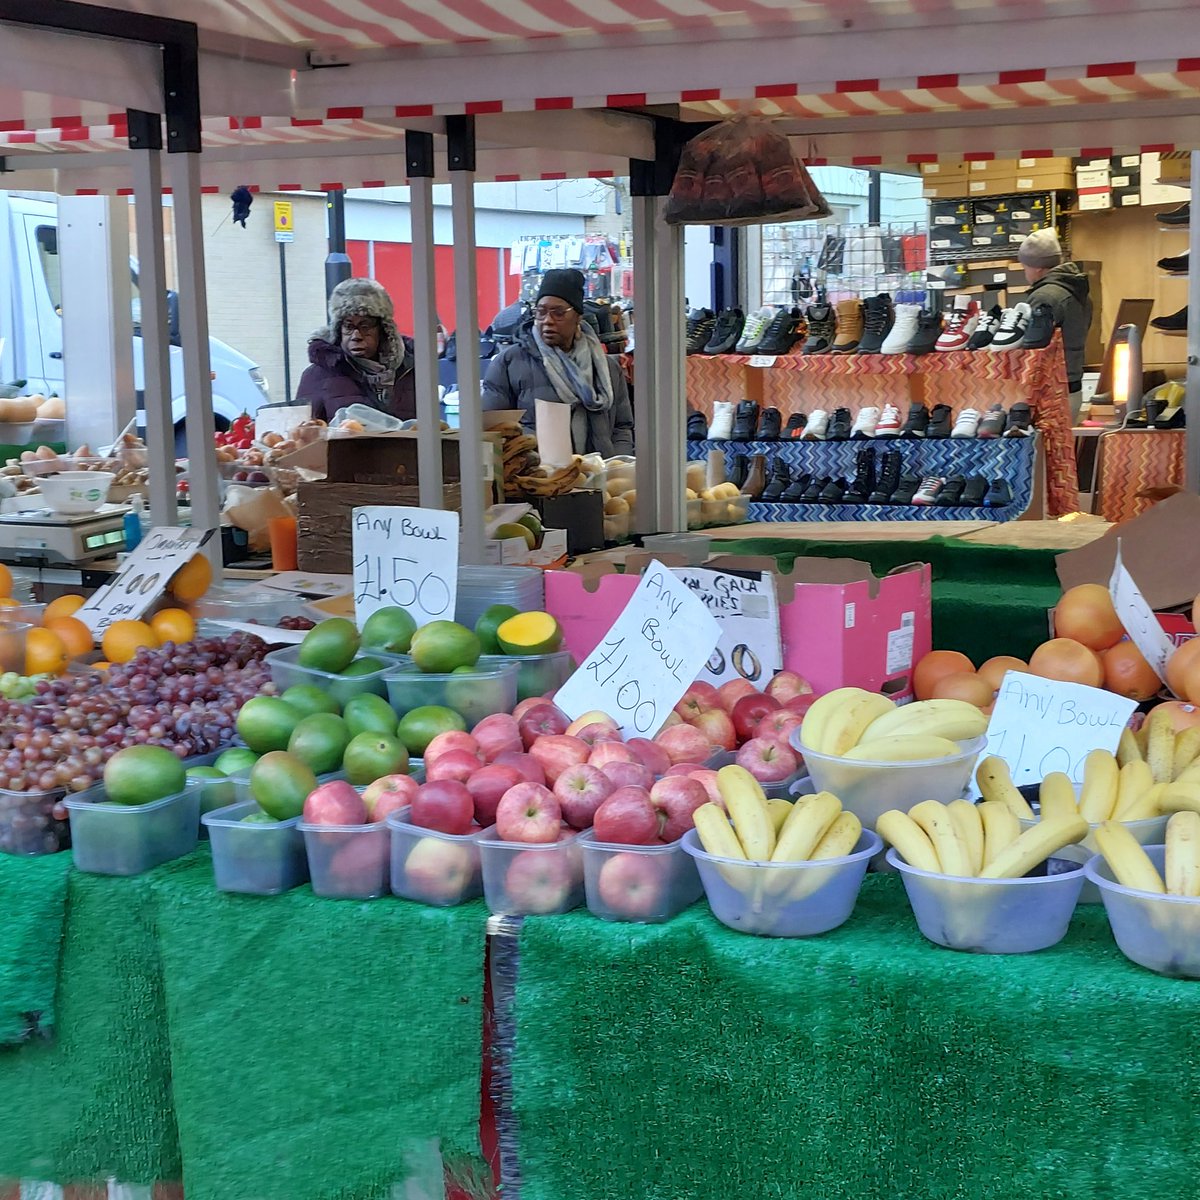 Looks great! Support our traders and don't forget to buy your #Christmas fruit & veg from the newly relocated Market. All your meat, fish and cheese needs in the Food Hall. 😋 @LeicesterMarket @visit_leicester #Markets #vegetables #fruits #Leicester